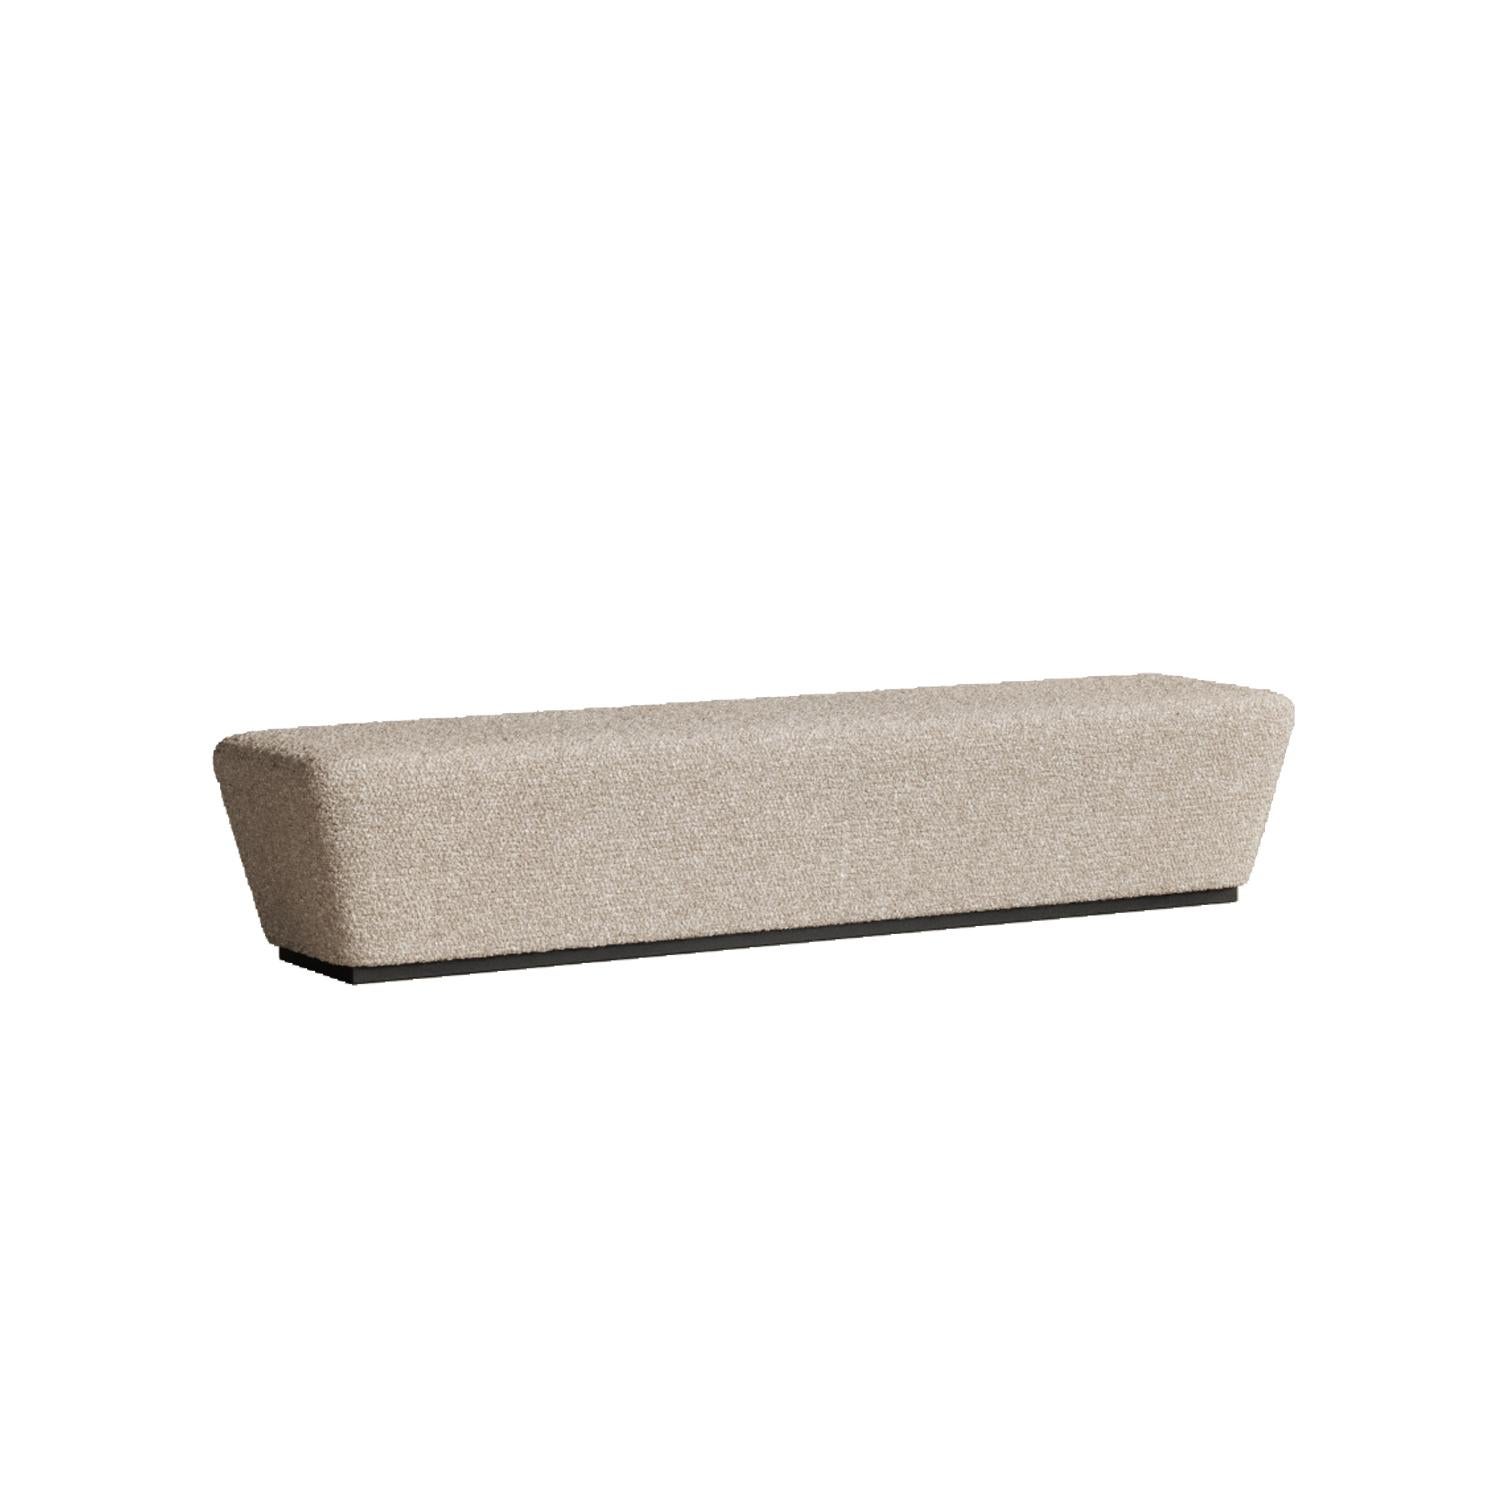 Beige Memory Bench by Plyus Design
Dimensions: D 42 x W 200 x H 38 cm
Materials:  Wood, HR foam, polyester wadding, fabric upholstery
Also available in a variety of colors. 

“Memory” bench.
Collection 